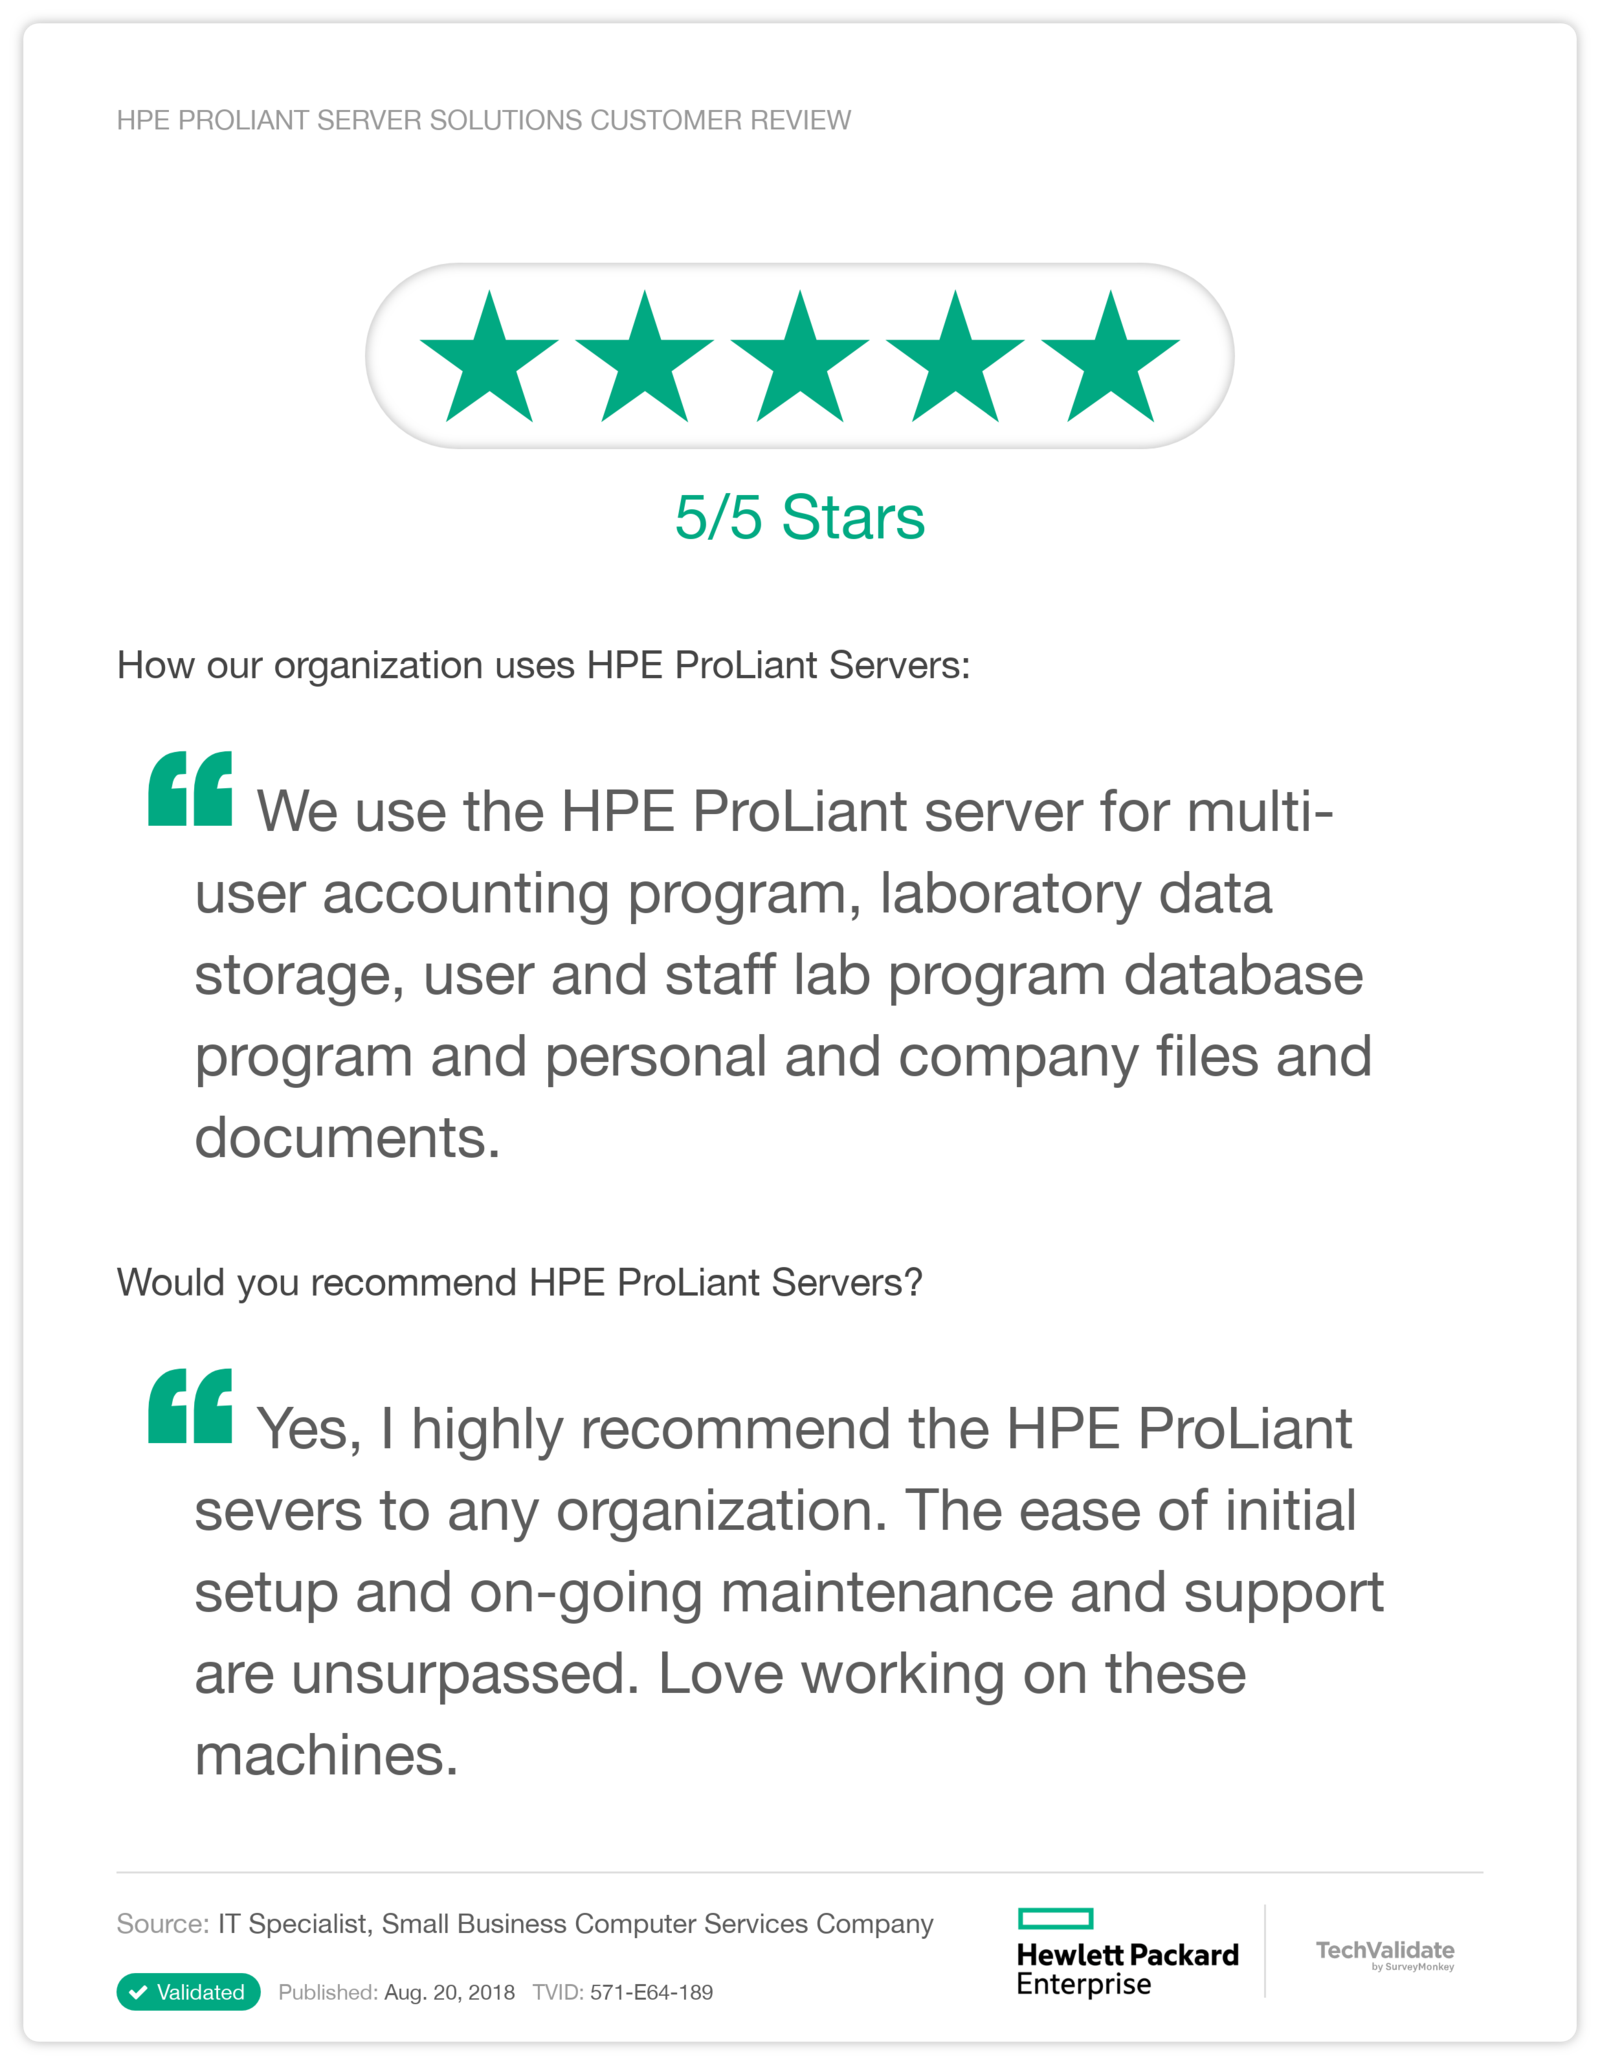 HPE ProLiant Server Solutions Customer Review